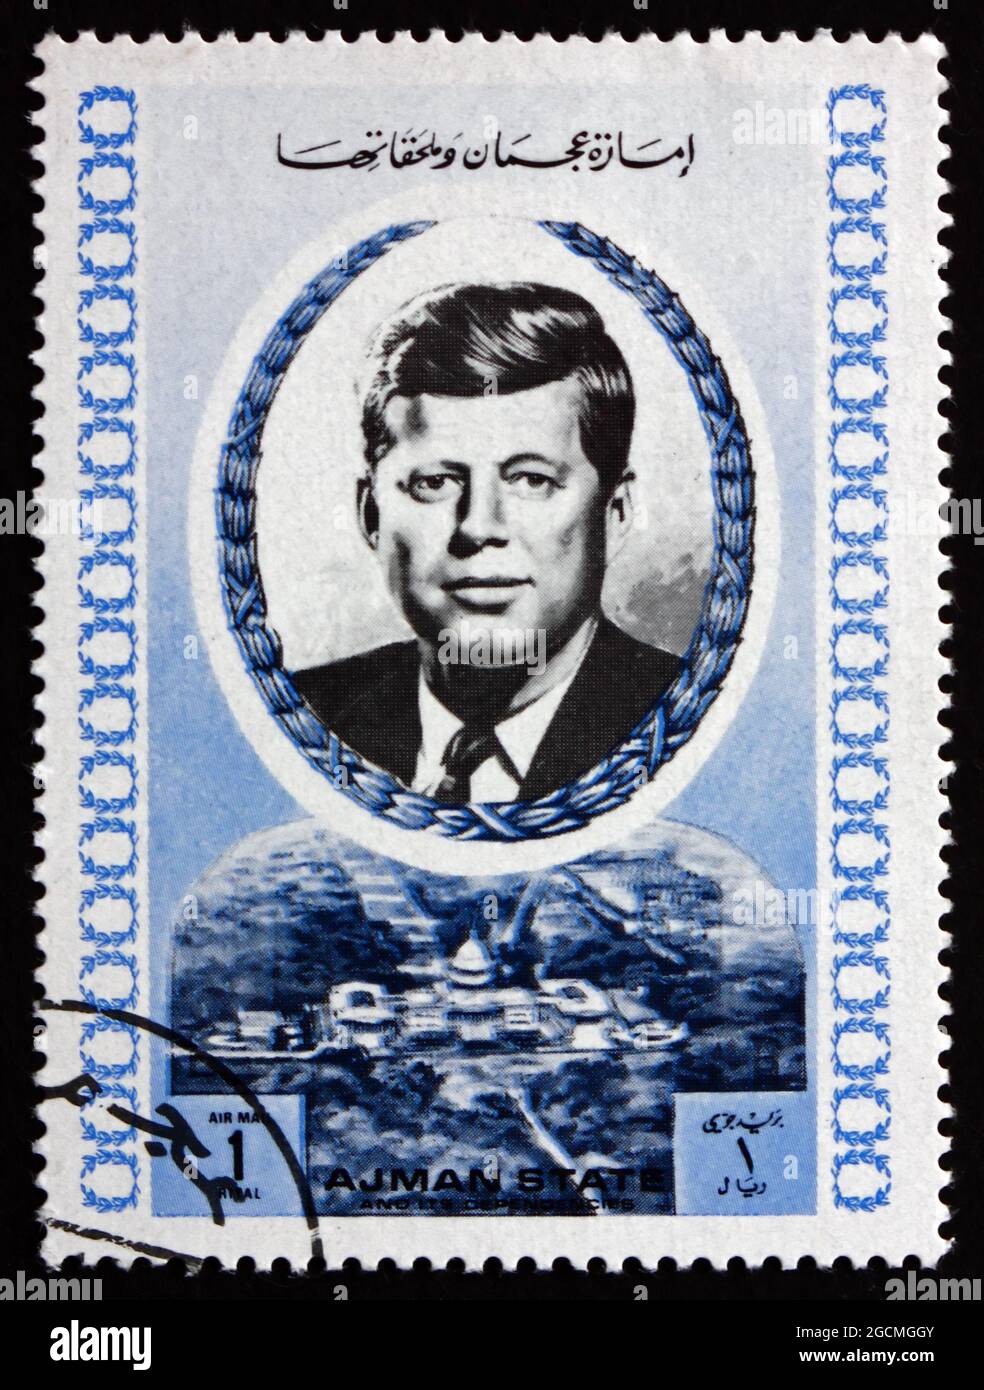 AJMAN - CIRCA 1972: a stamp printed in Ajman shows John F. Kennedy, an American Politician who Served as the 35th President of United States, circa 19 Stock Photo